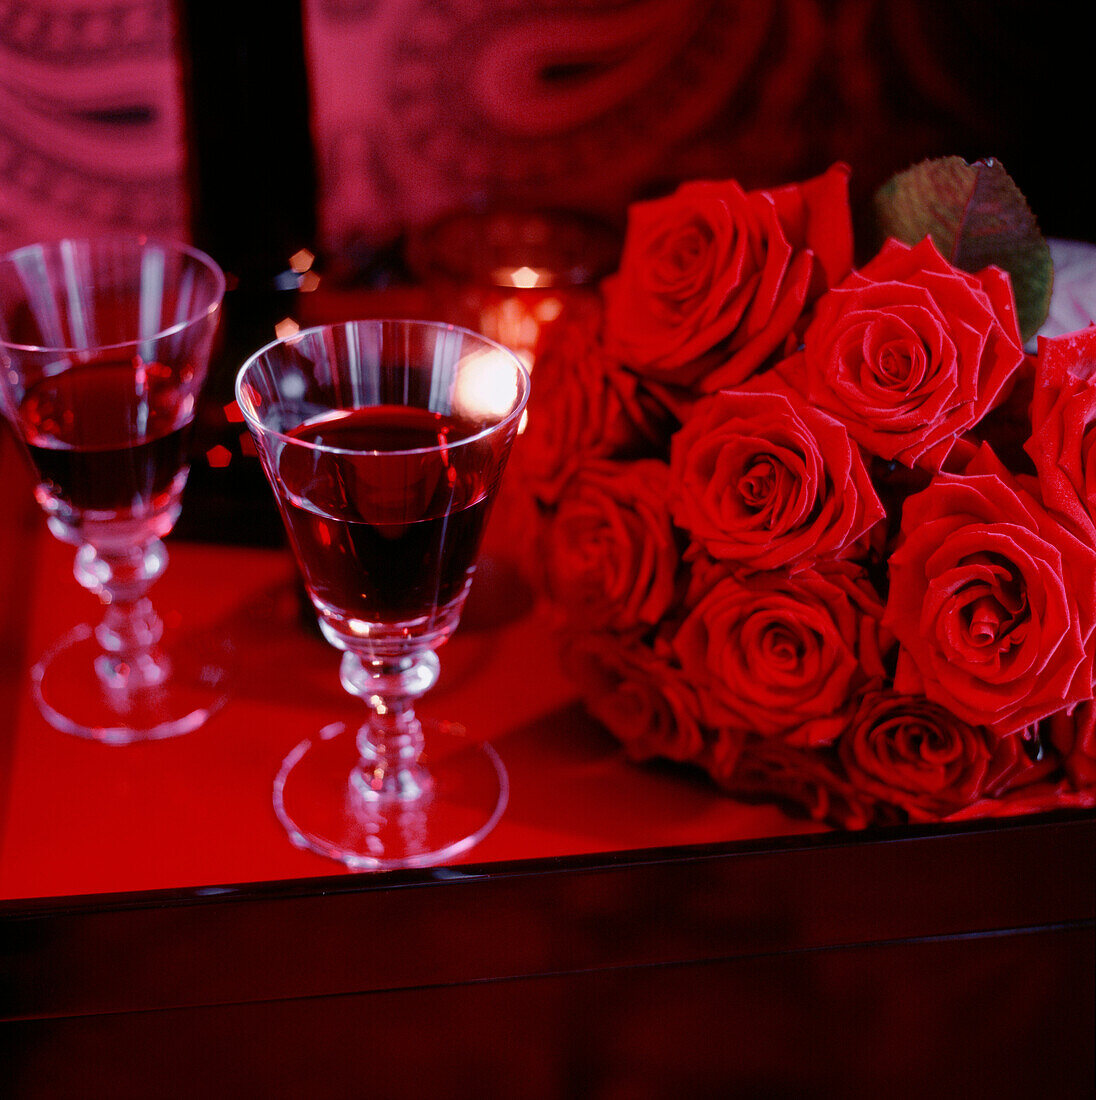 A bunch of red roses resting on a tabletop next to glasses of red wine